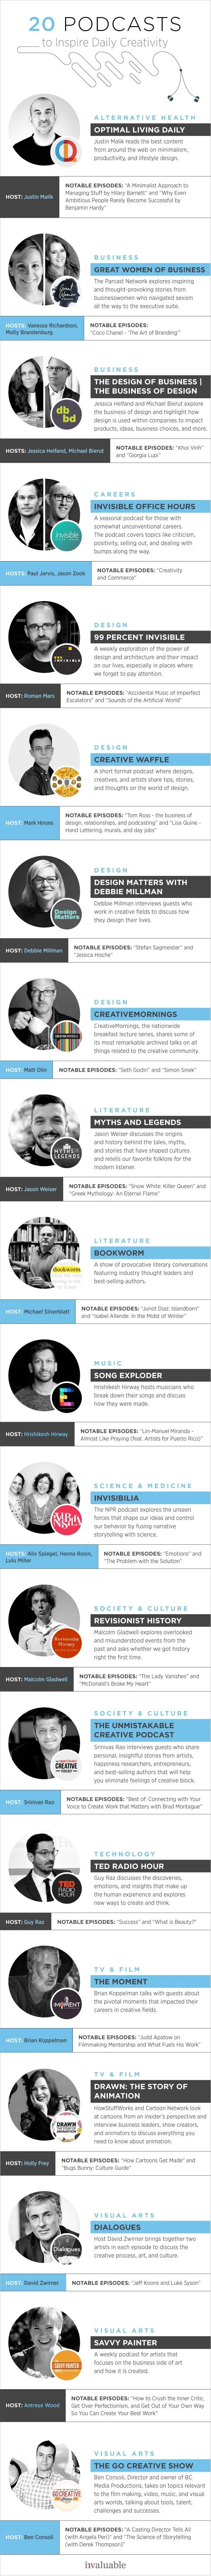 20 Podcasts to Inspire Daily Creativity - #infographic